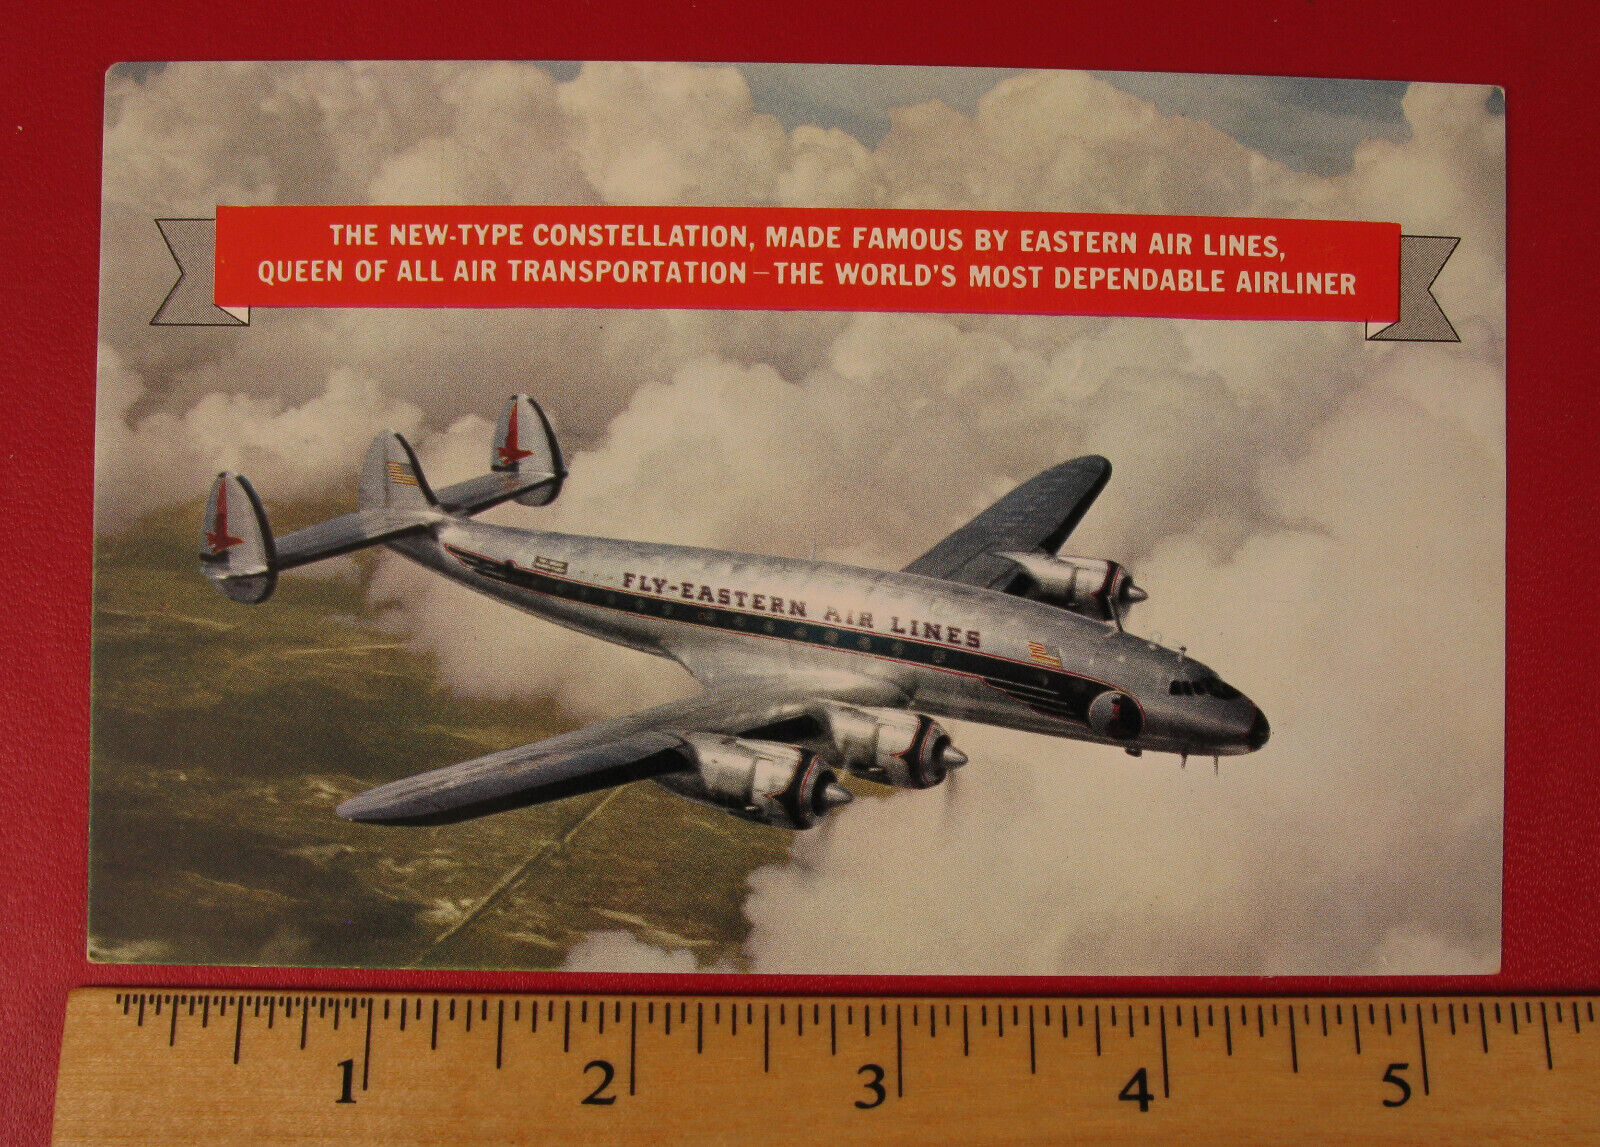 VINTAGE POST CARD EASTERN AIRLINES CONSTELLATION MOST DEPENDABLE AIRPLANE 